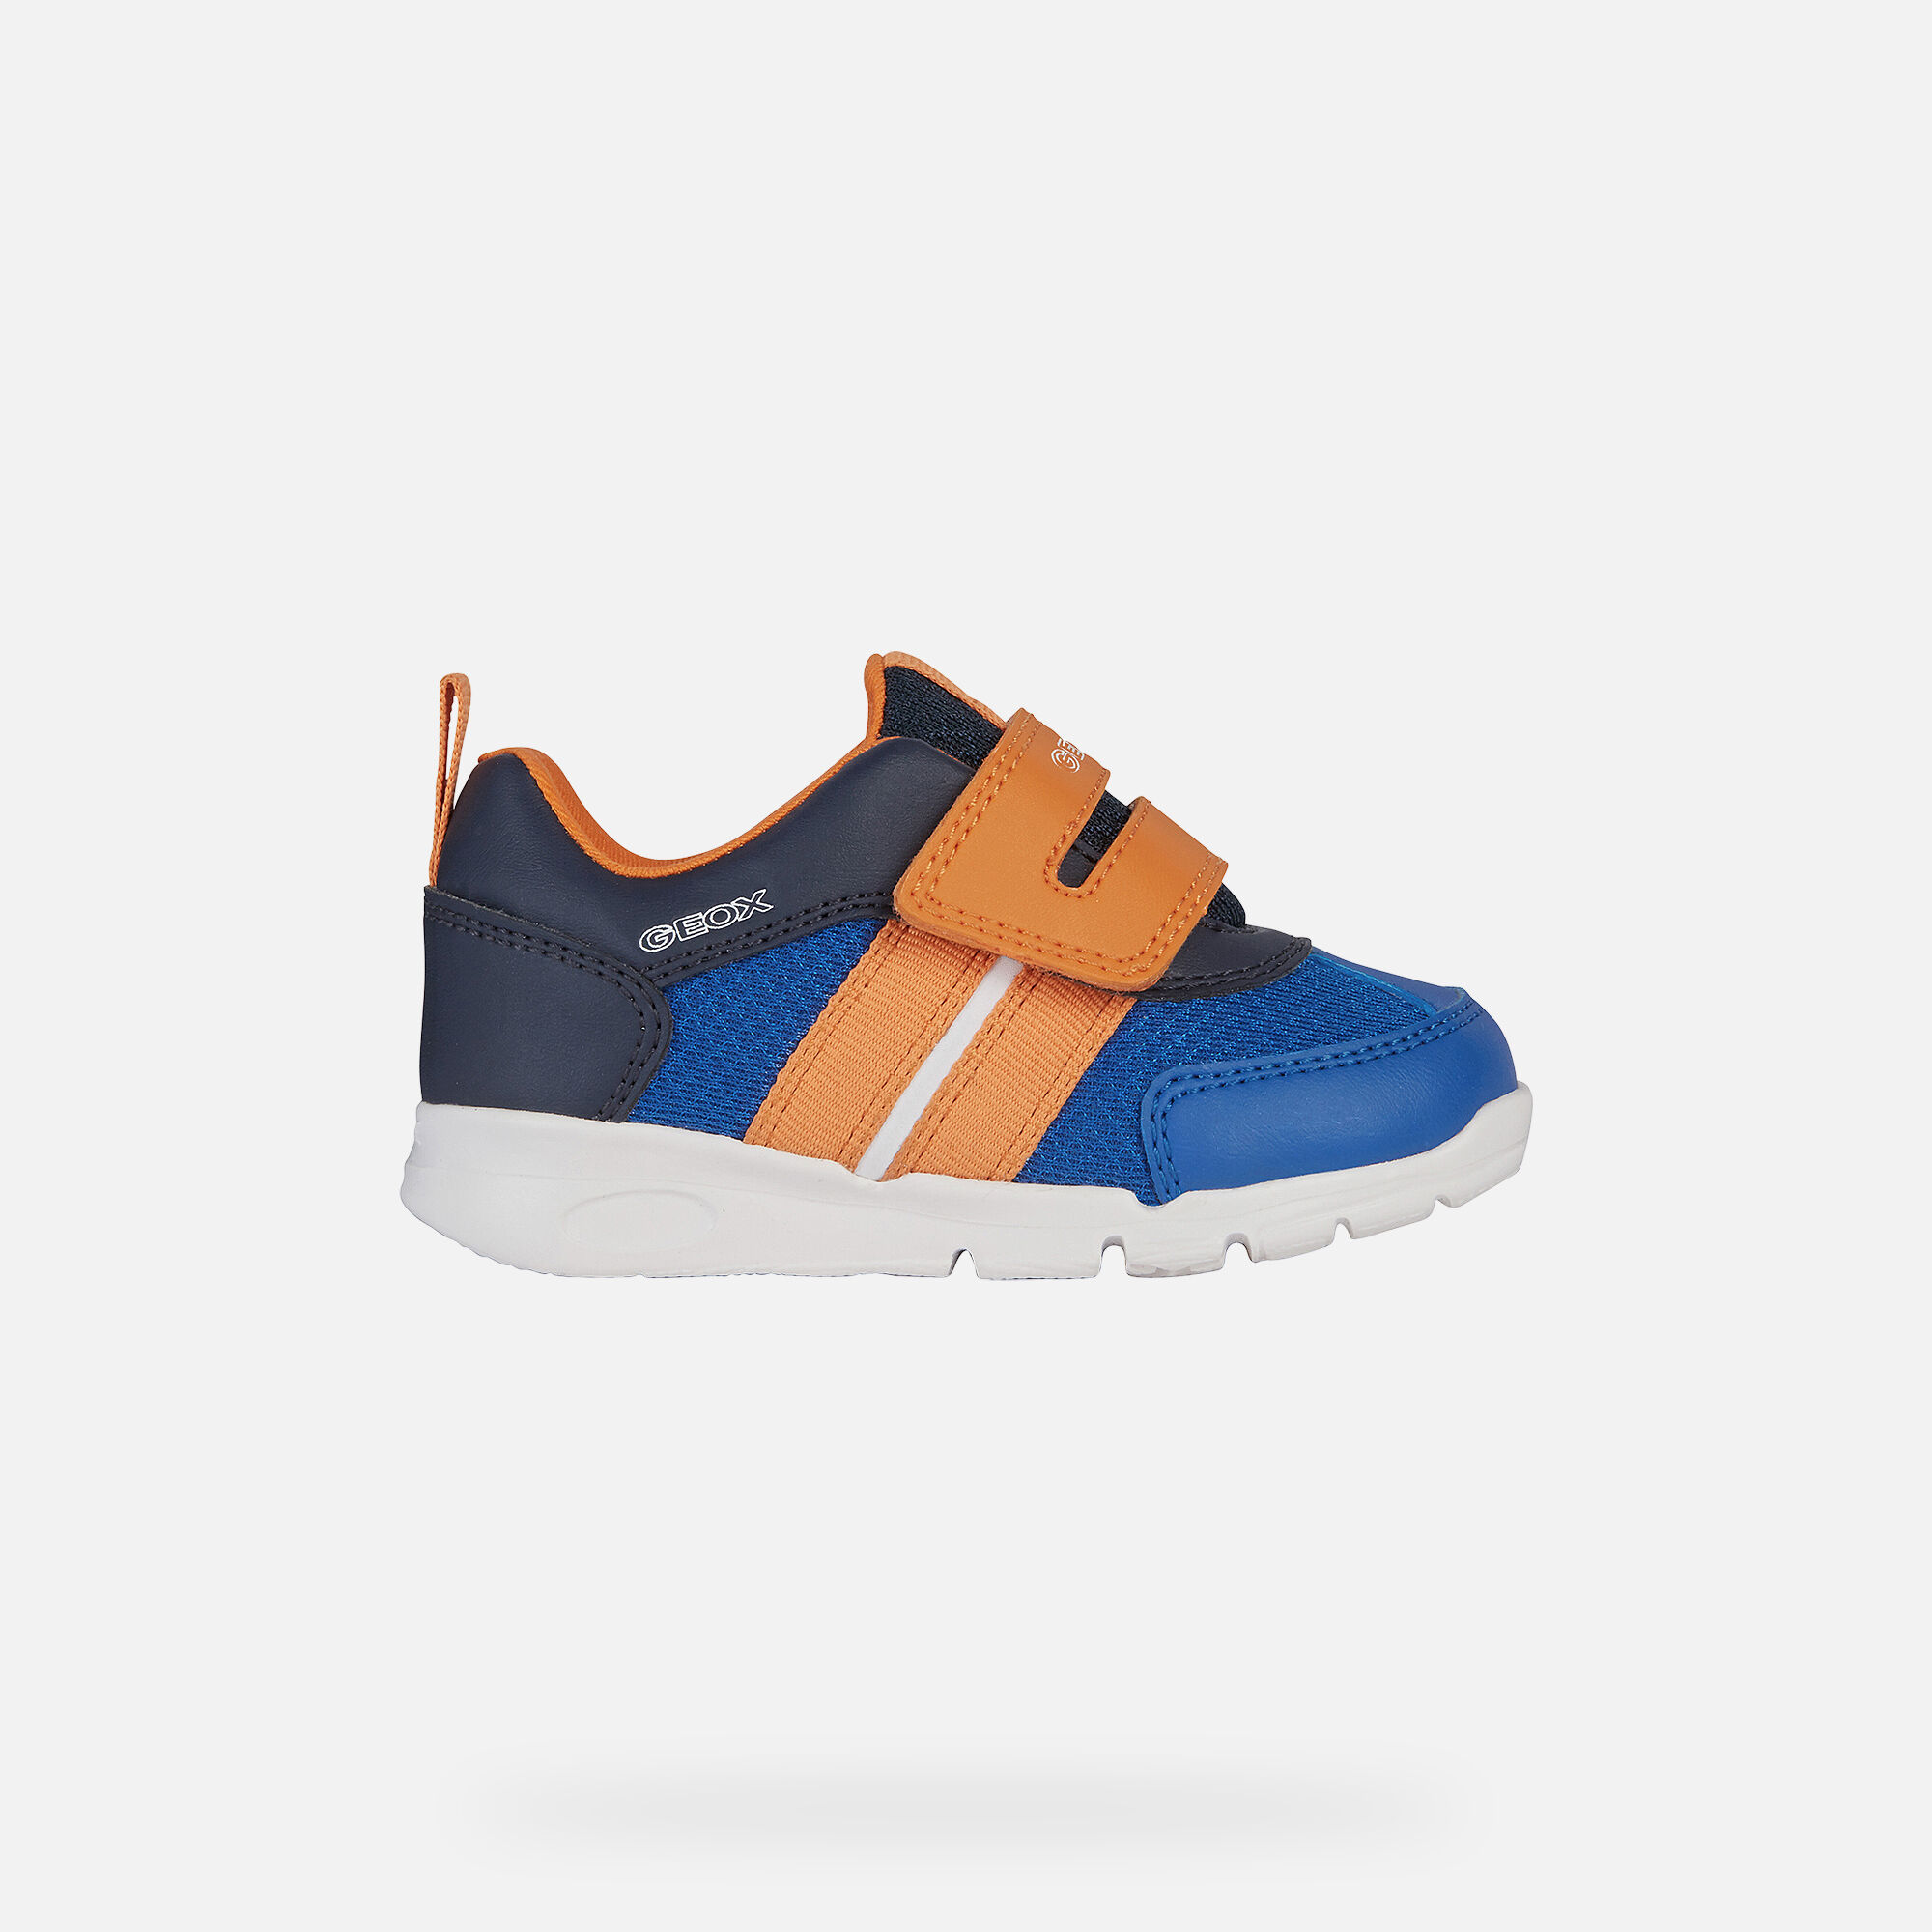 Geox® RUNNER Baby Boy: Royal blue and 